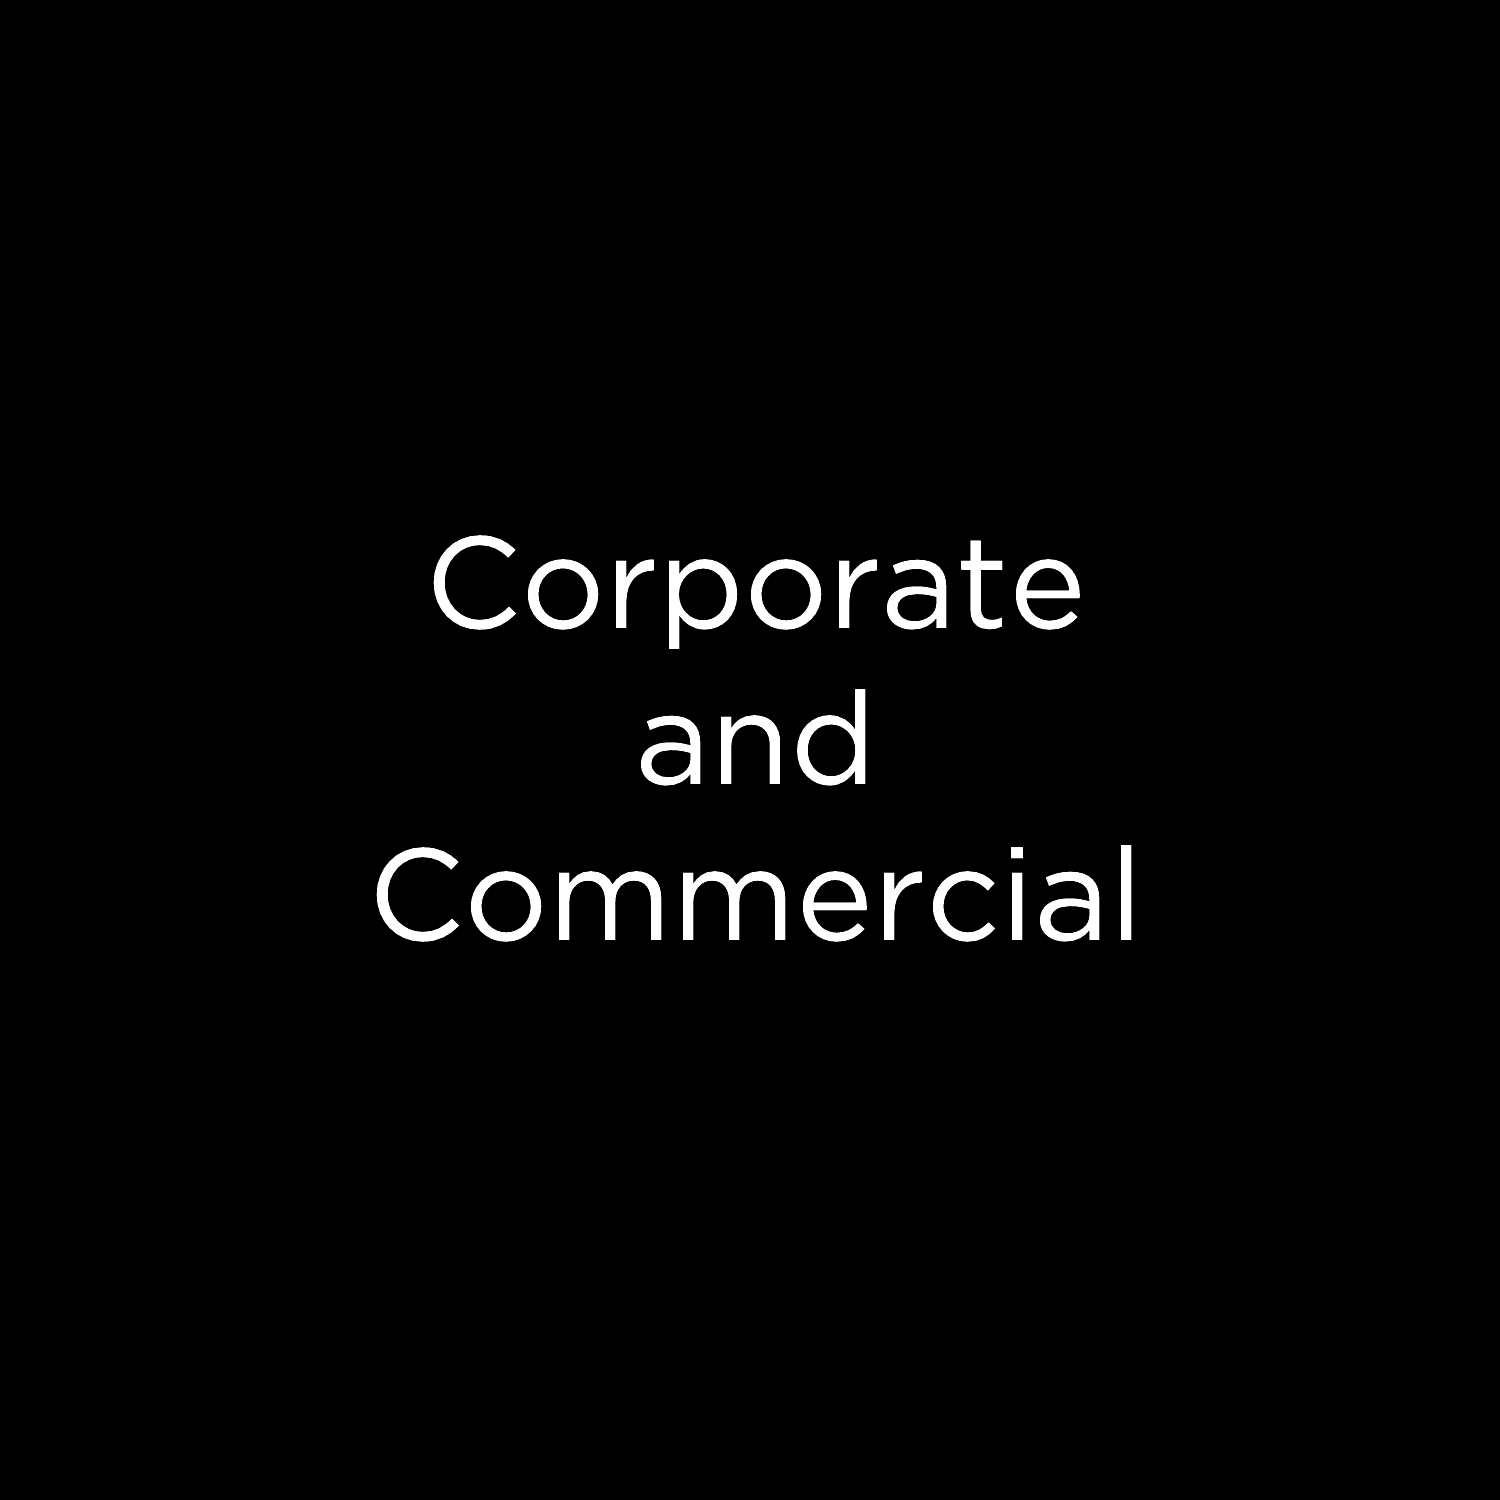 Corporate and Commercial.jpg